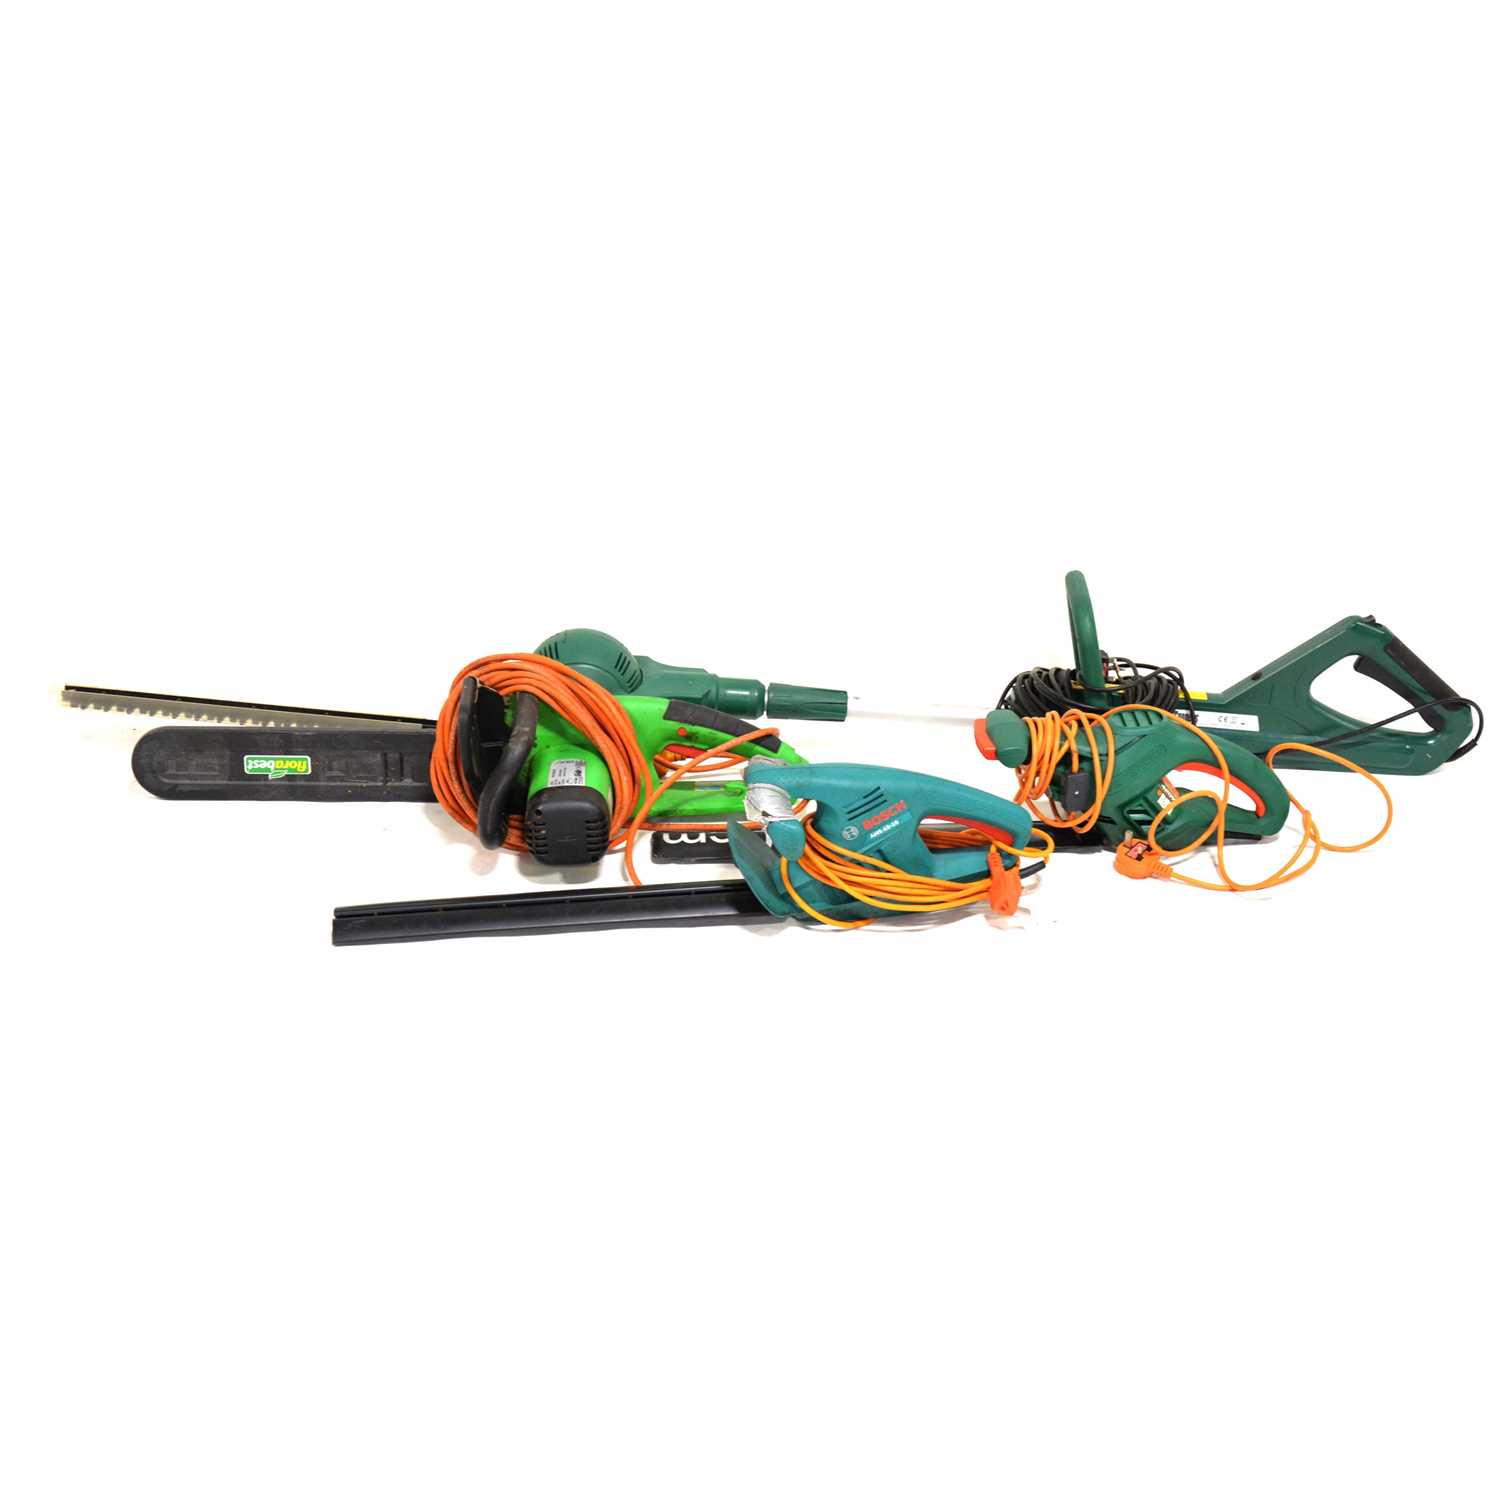 Florabest electric chainsaw, various hedge cutters and a blower.